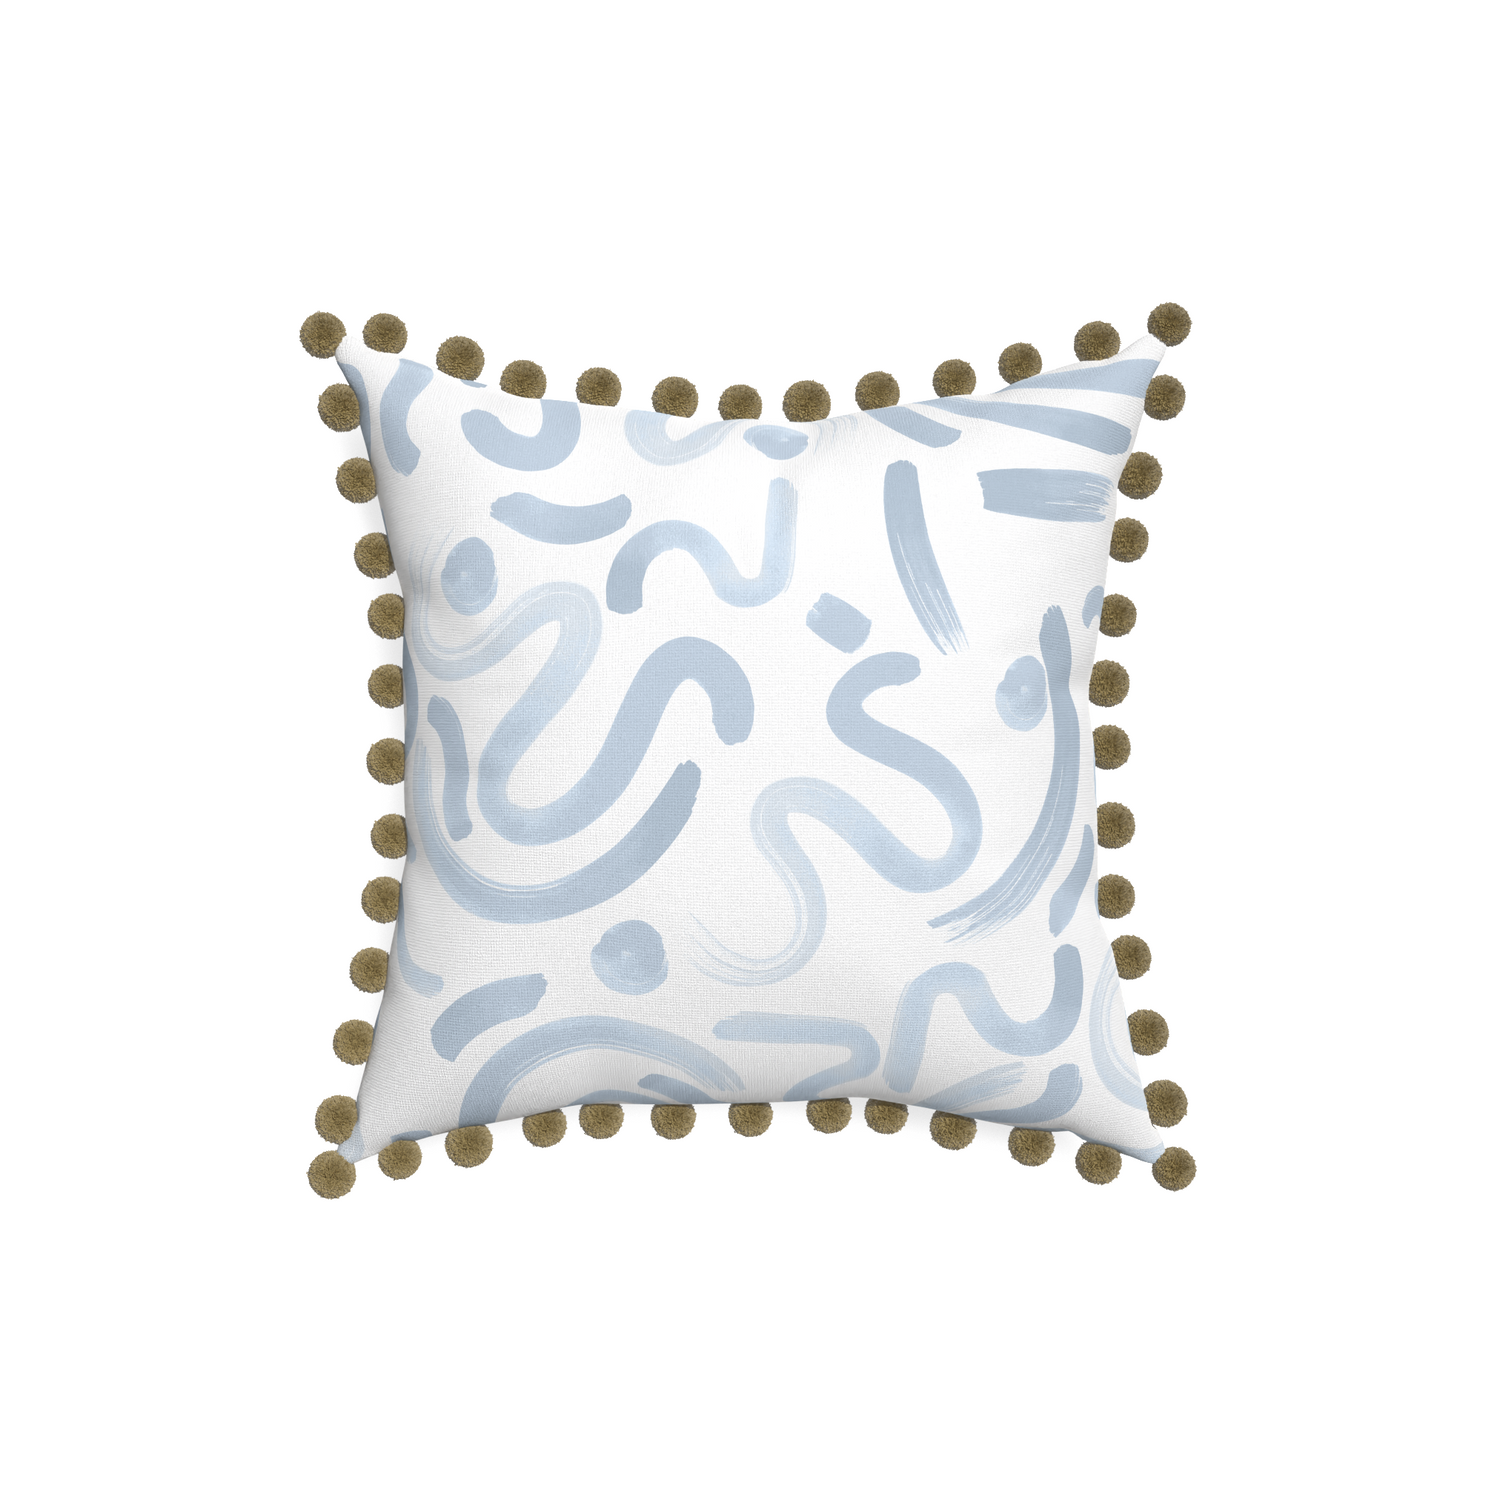 18-square hockney sky custom abstract sky bluepillow with olive pom pom on white background